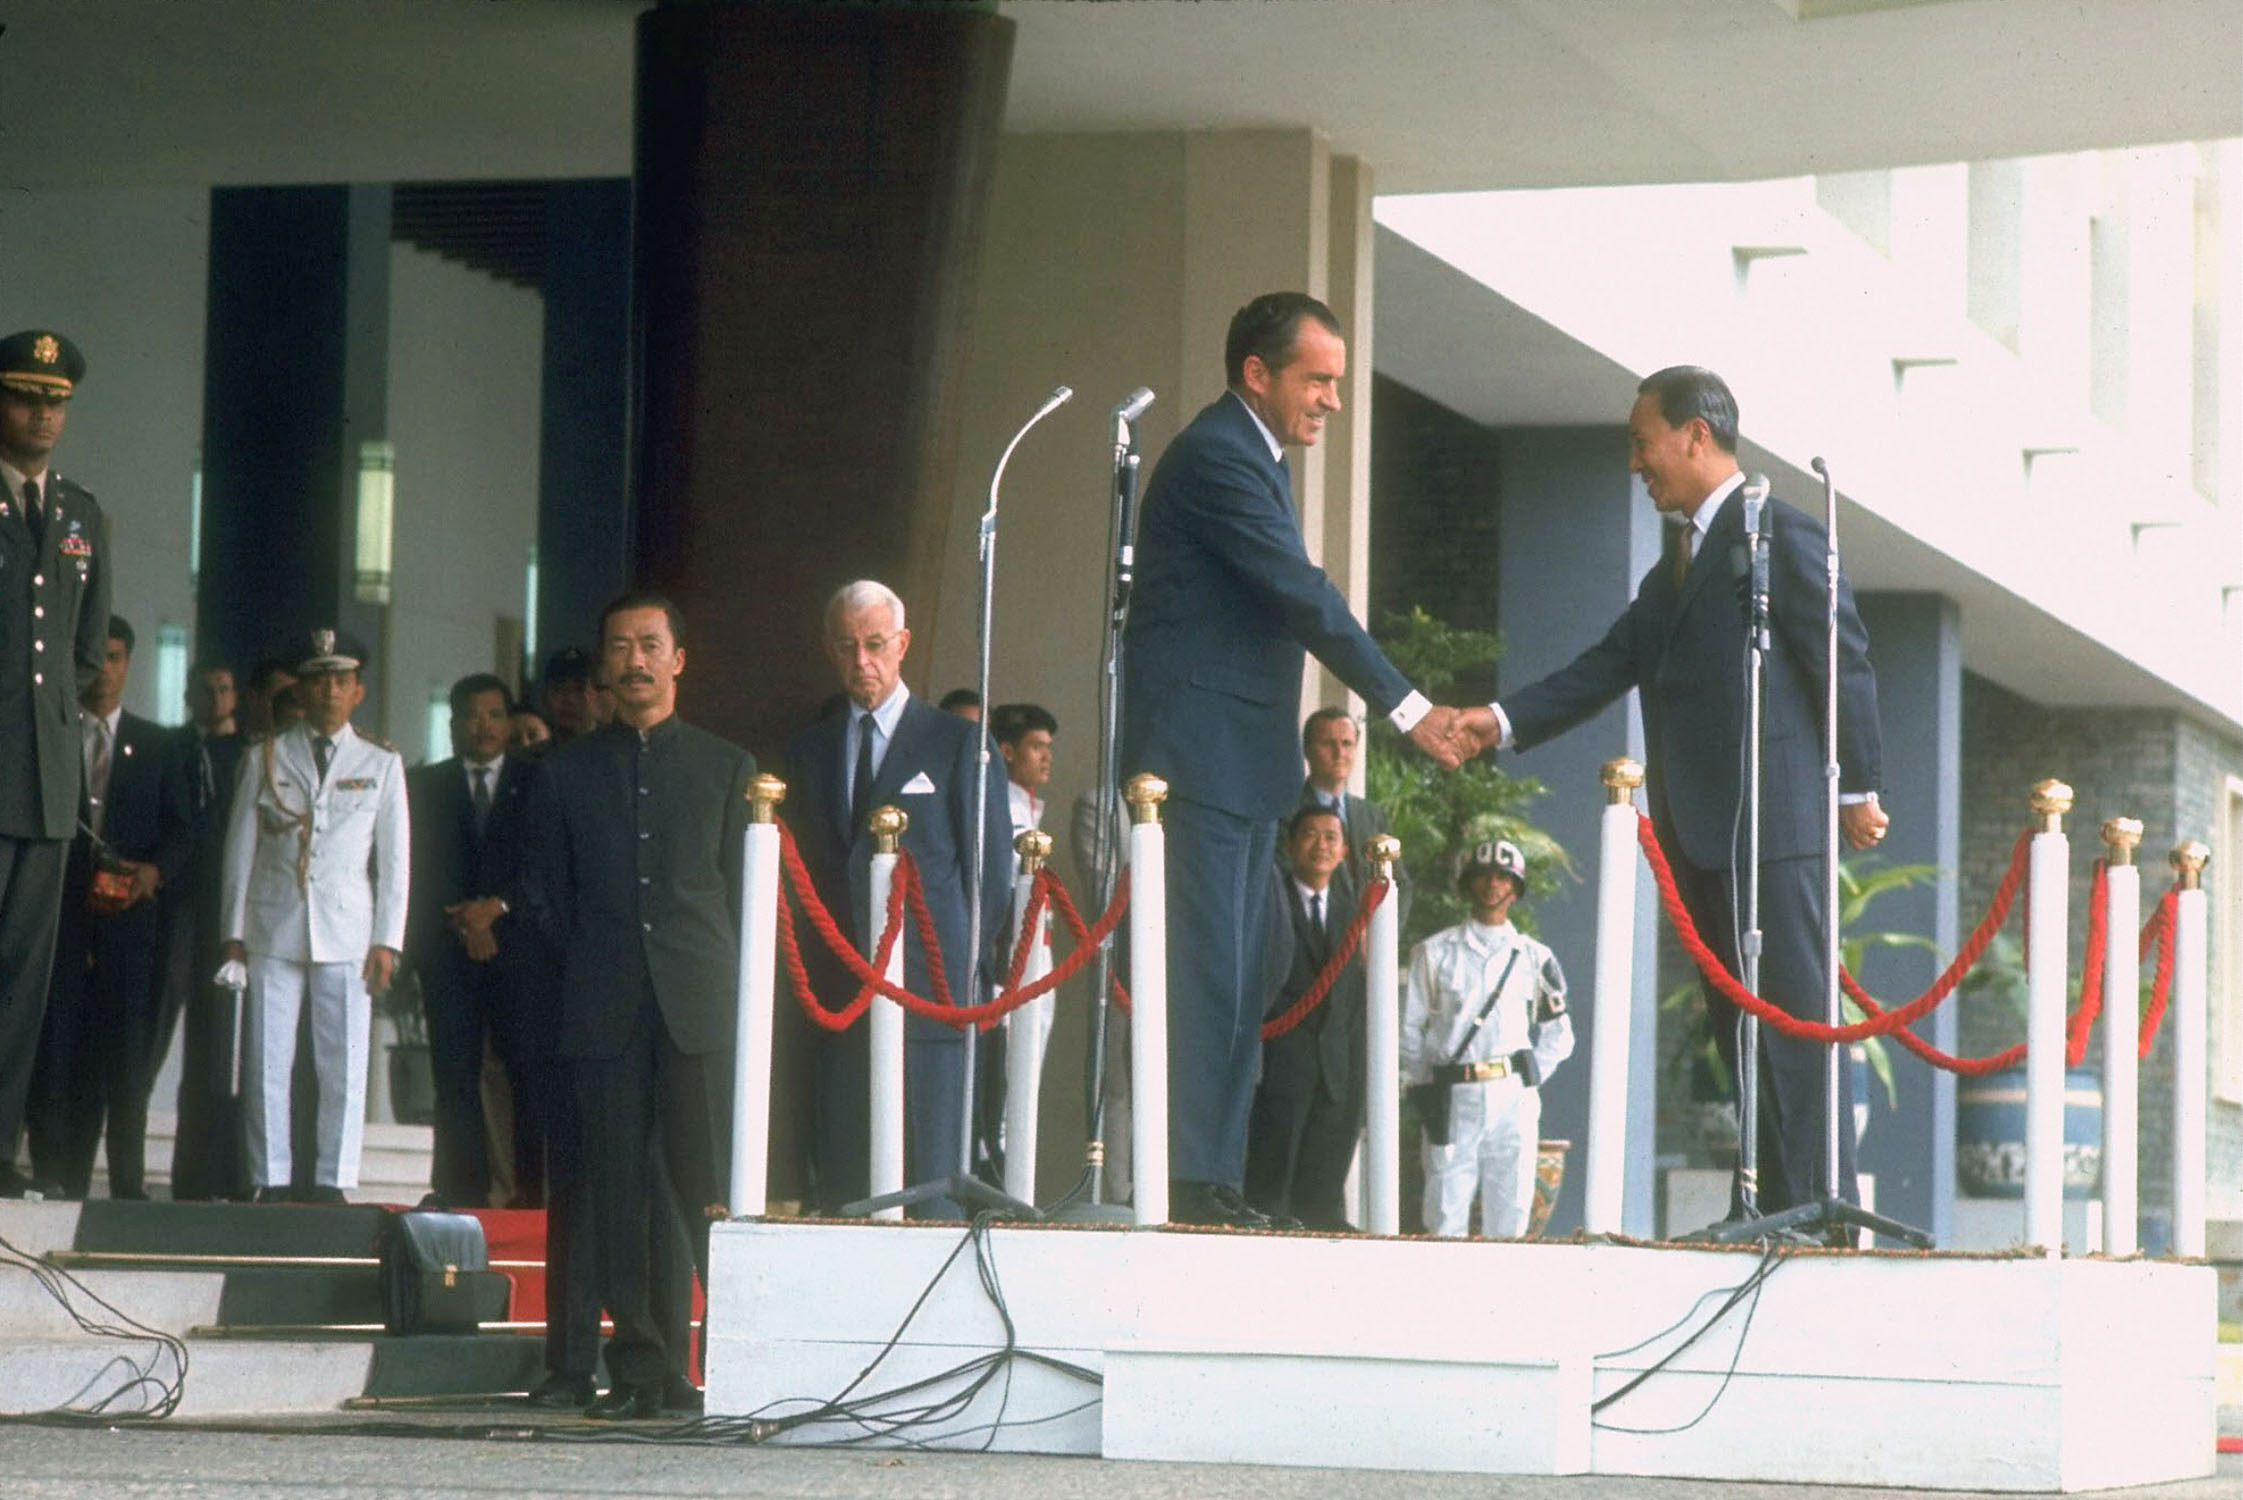 two men in suits and ties shaking hands at a ceremony